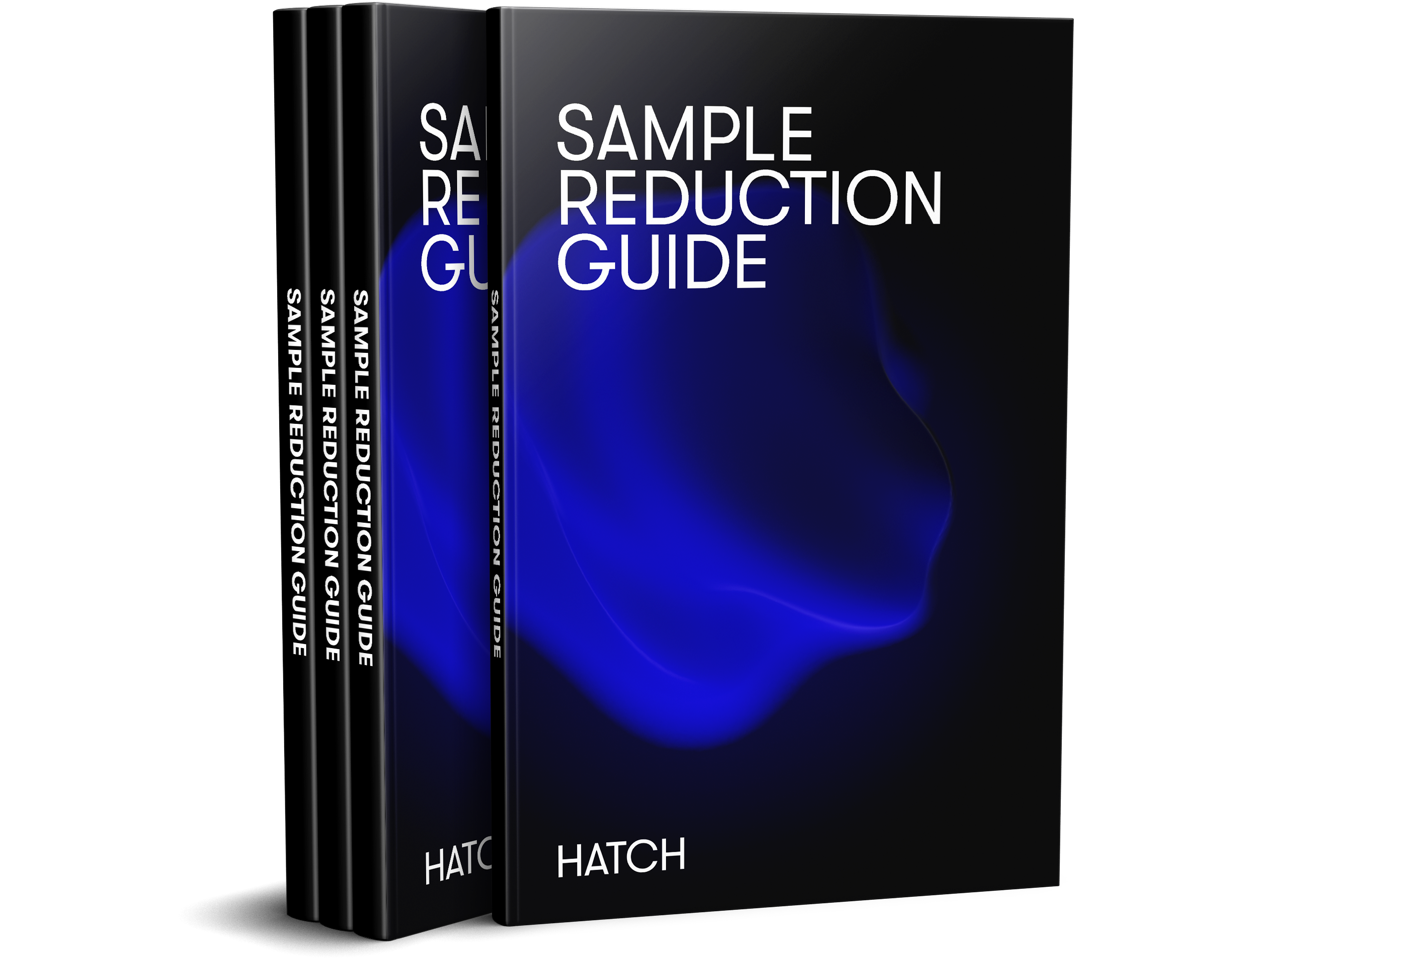 Sample Reduction Guide Mockup Cropped1